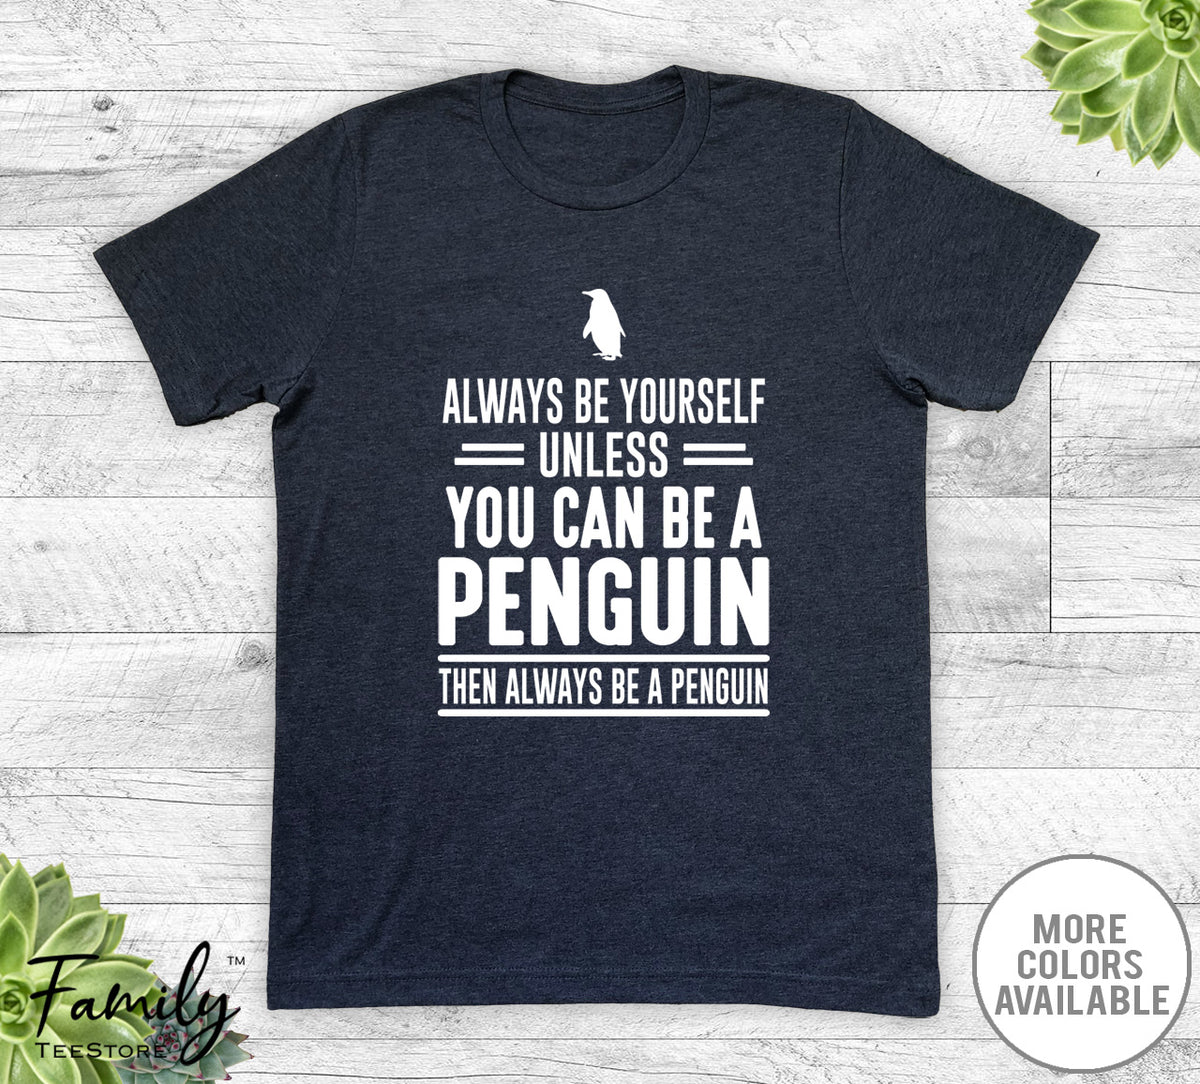 Always Be Yourself Unless You Can Be A Penguin - Unisex T-shirt - Penguin Shirt - Penguin Gift - familyteeprints